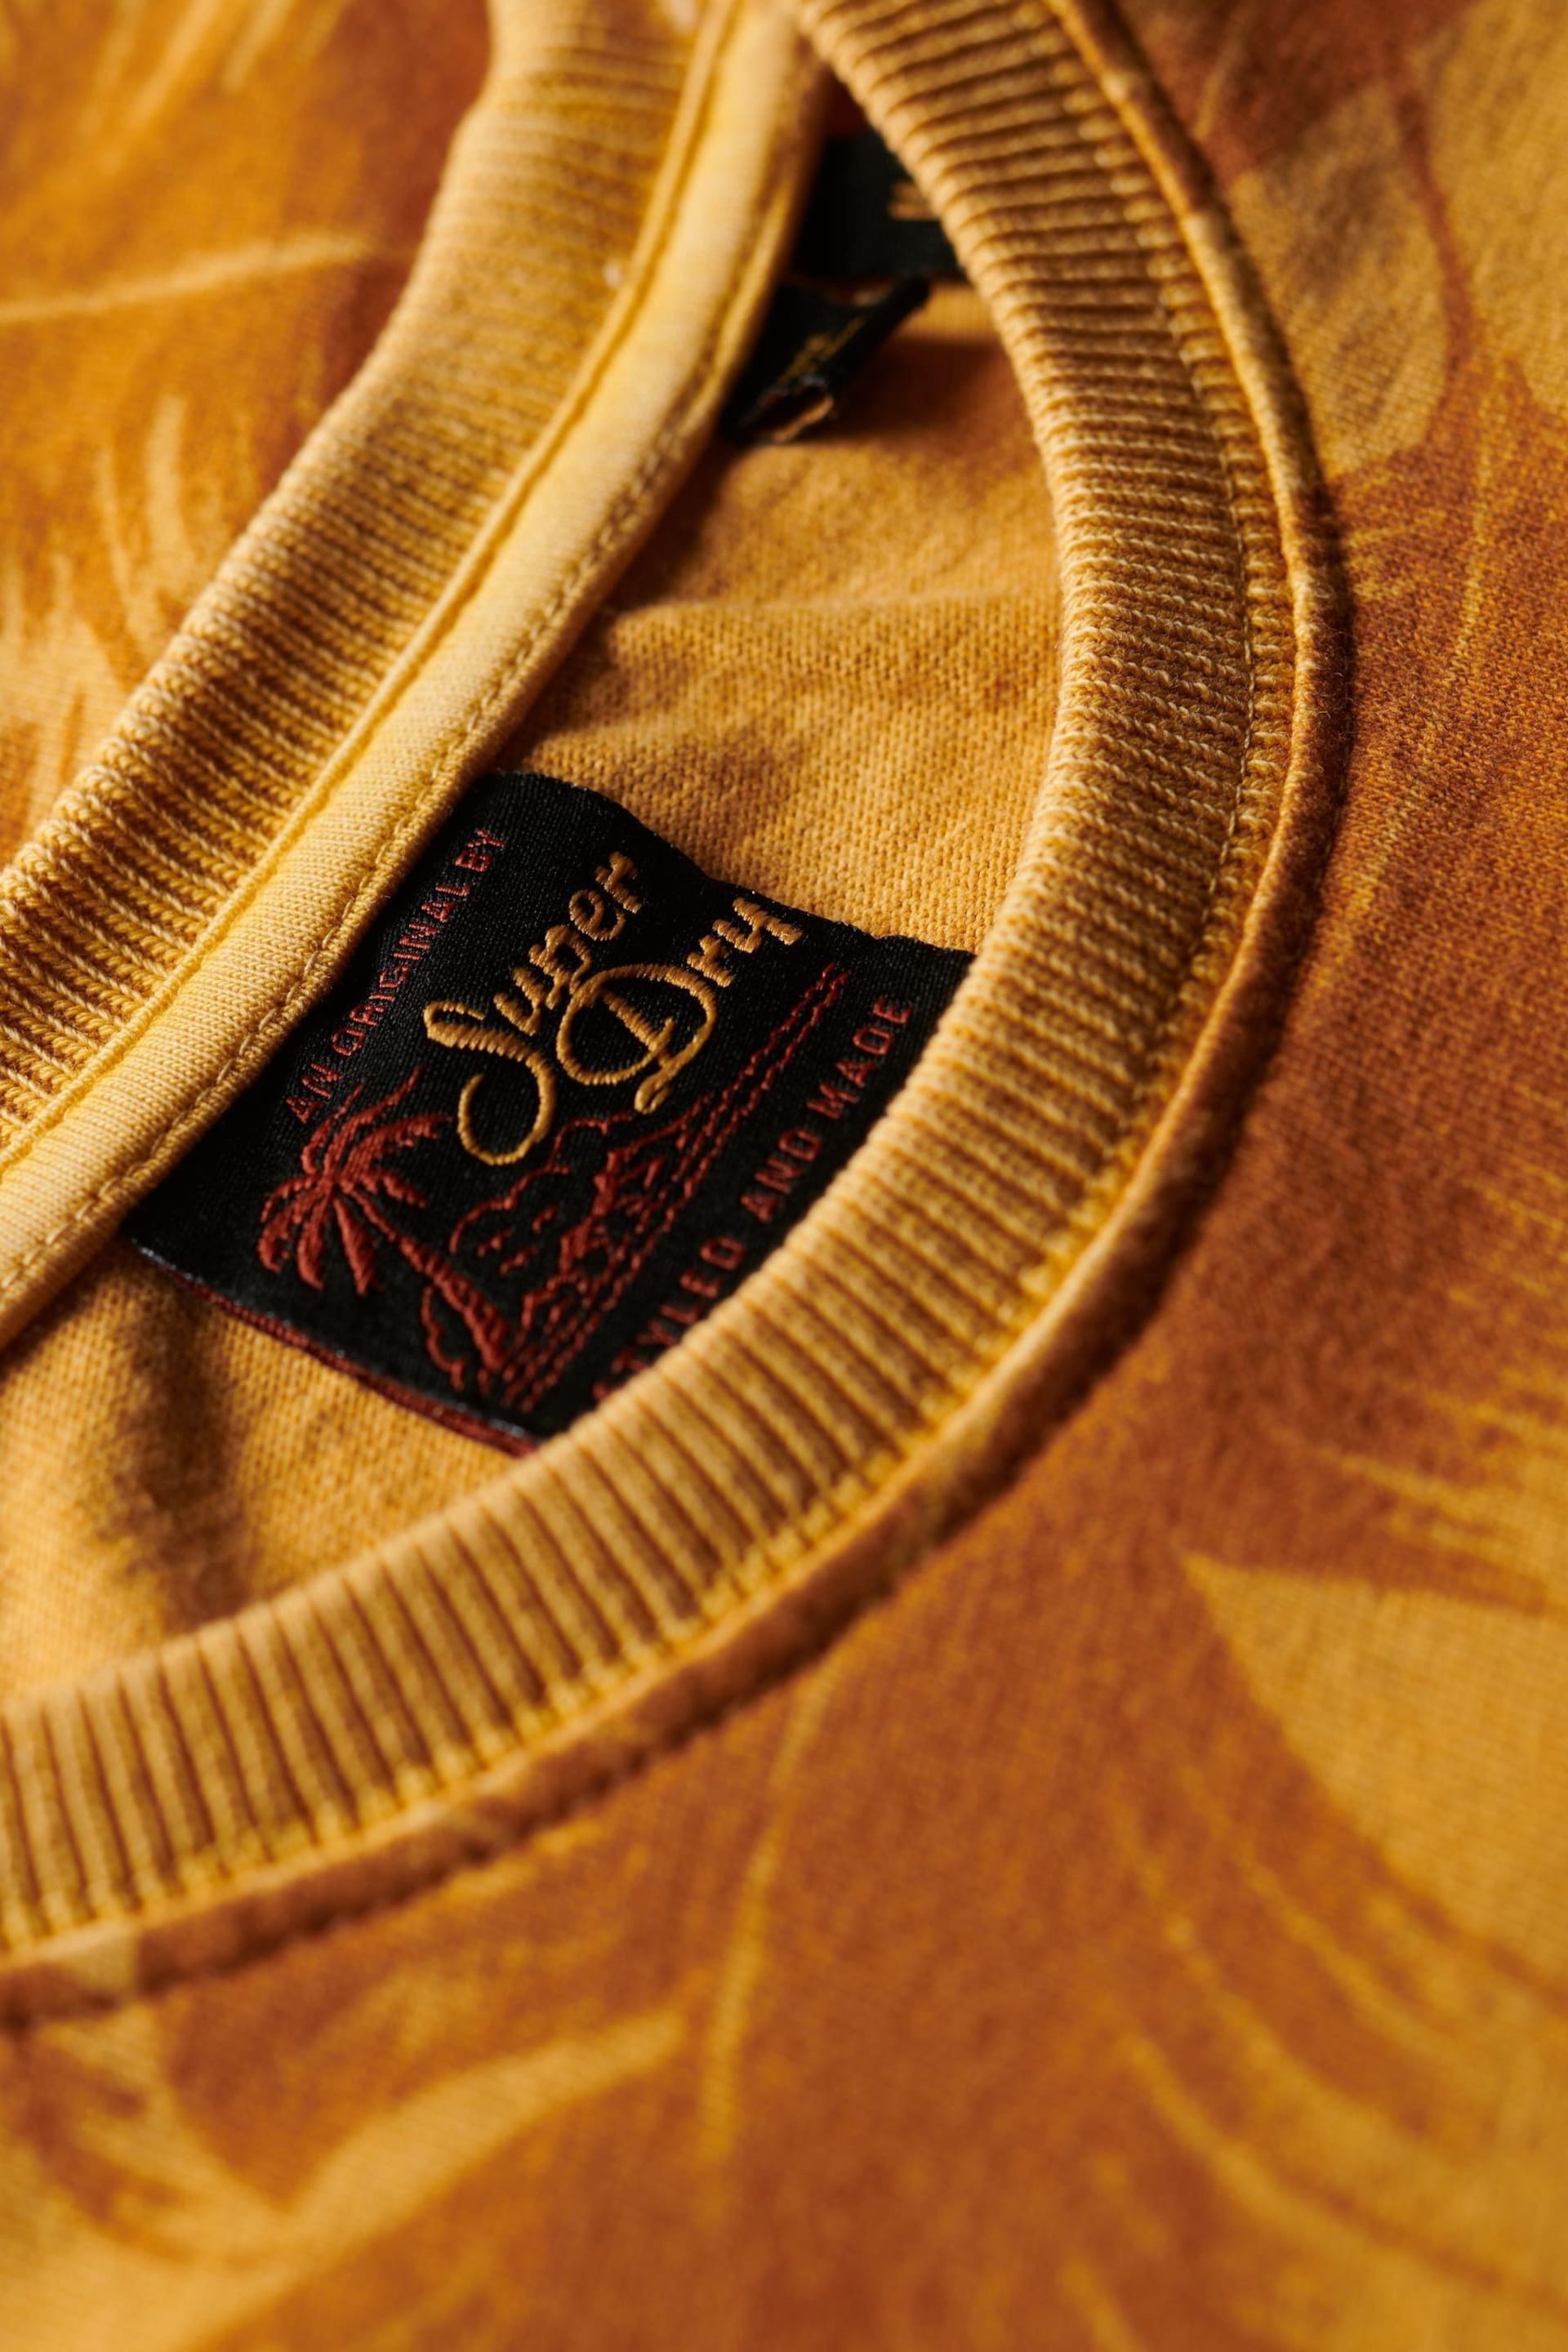 Superdry Yellow Vintage Overdye Printed T-Shirt - Image 6 of 6